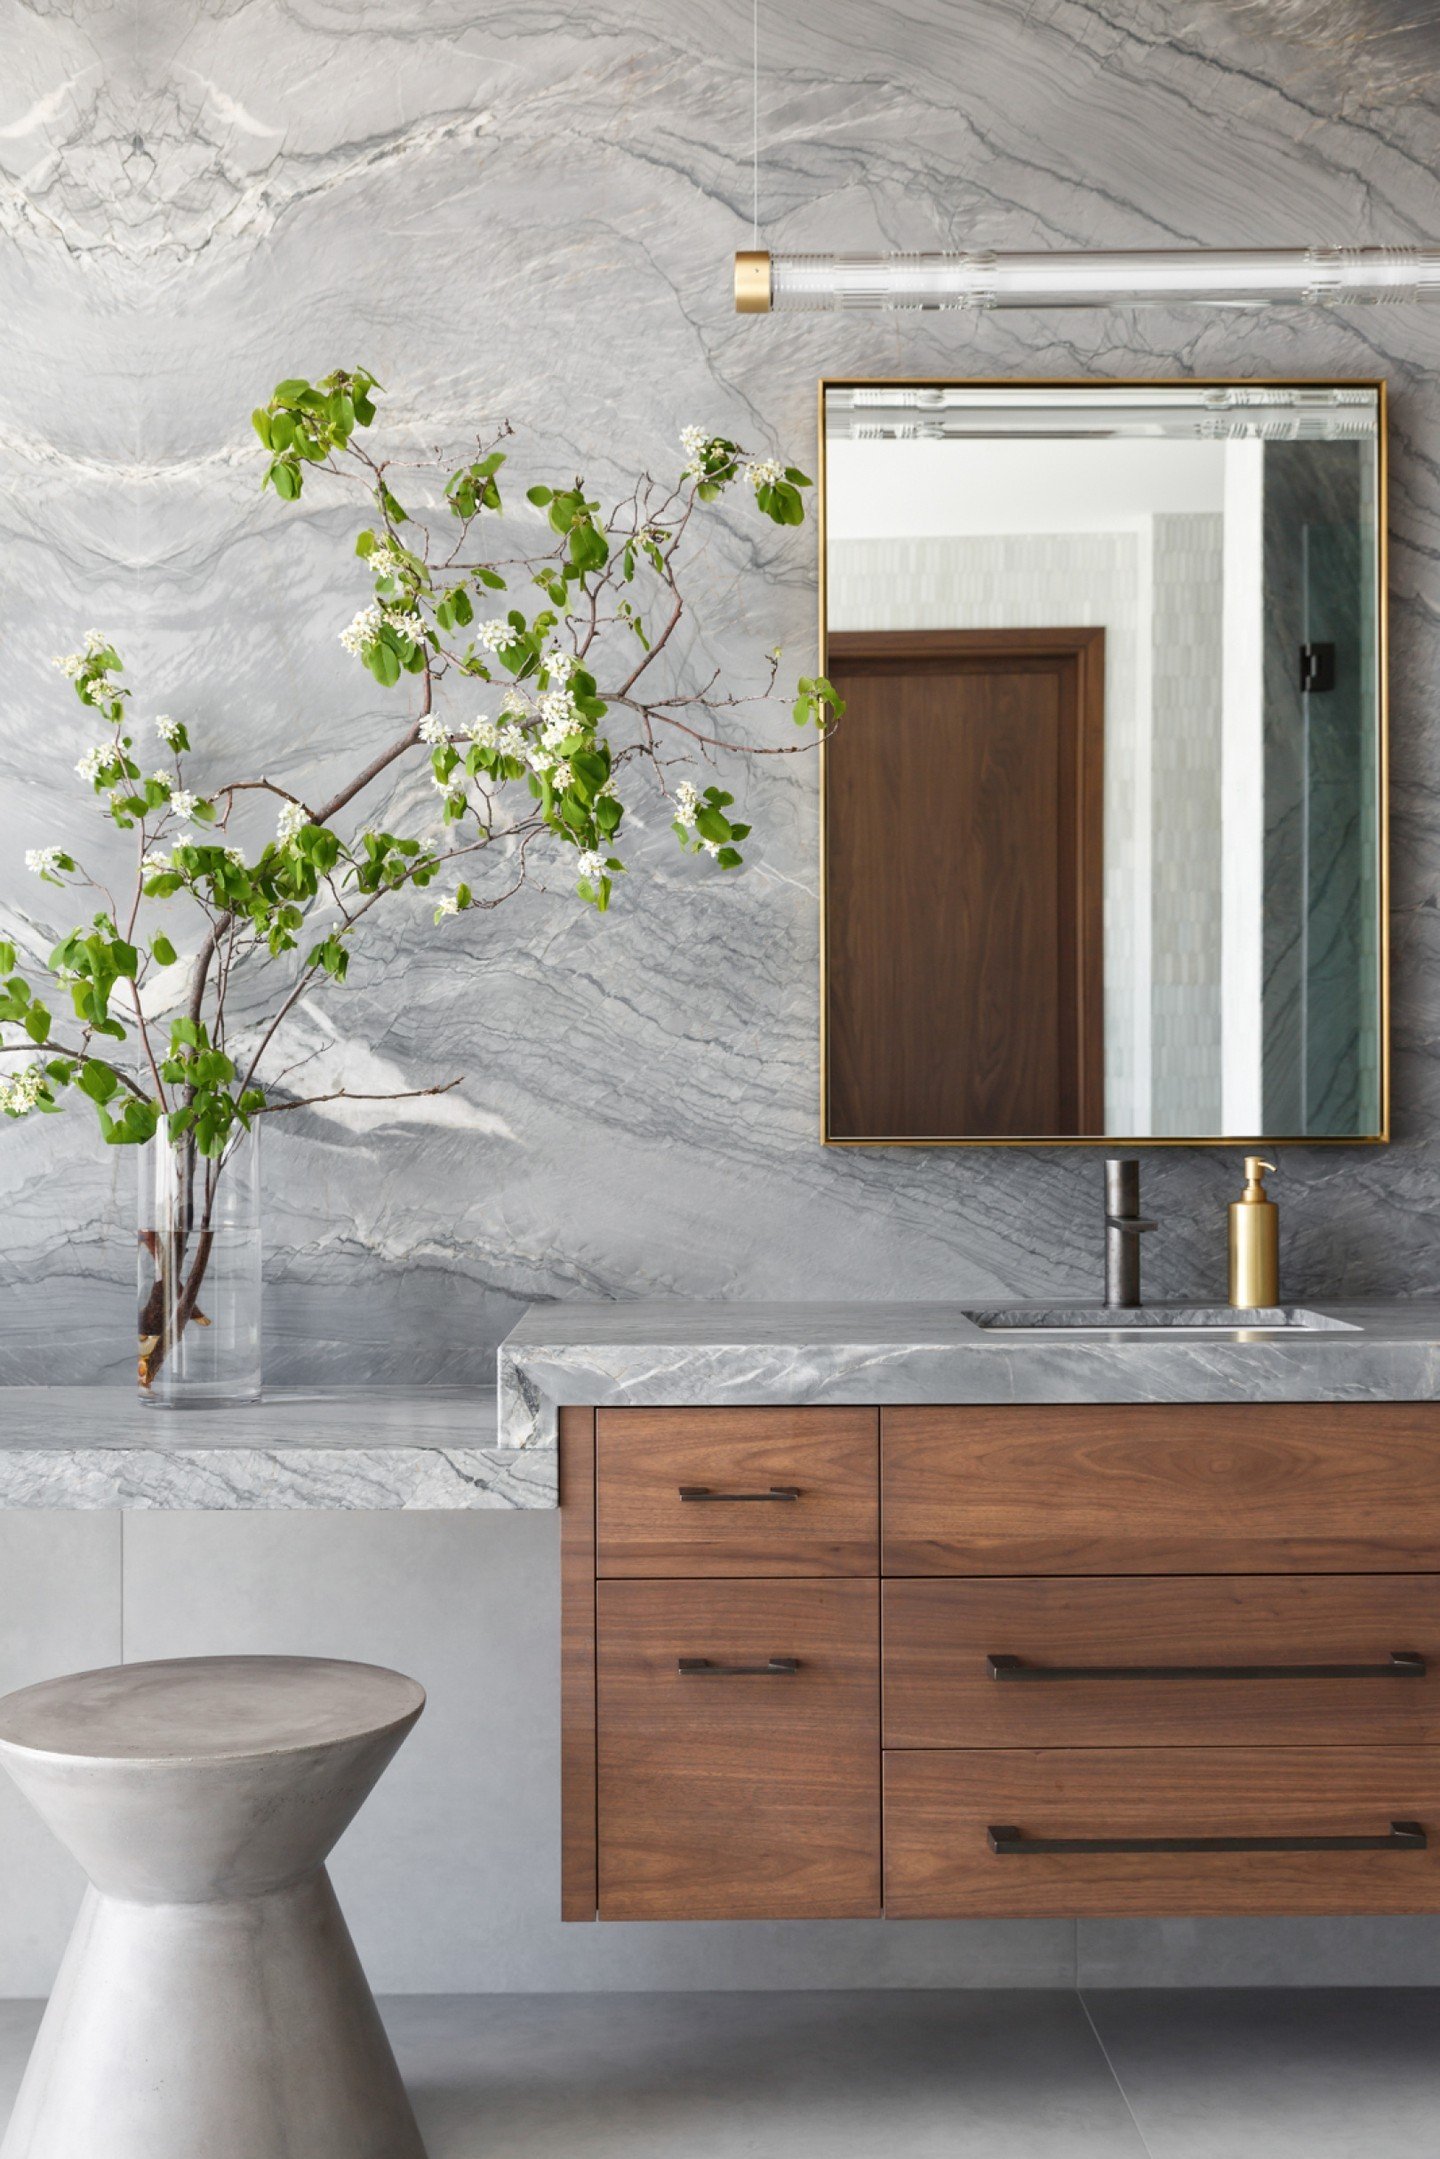 The artistry of natural stone is in a league of its own. Exhibit A: At our #IHRosedaleResidence, Vareena Quartzite sets the tone as the perfect backdrop for this spa-inspired bathroom. 

Photography: @philcrozier
Interiors: @in.house.design
Architect